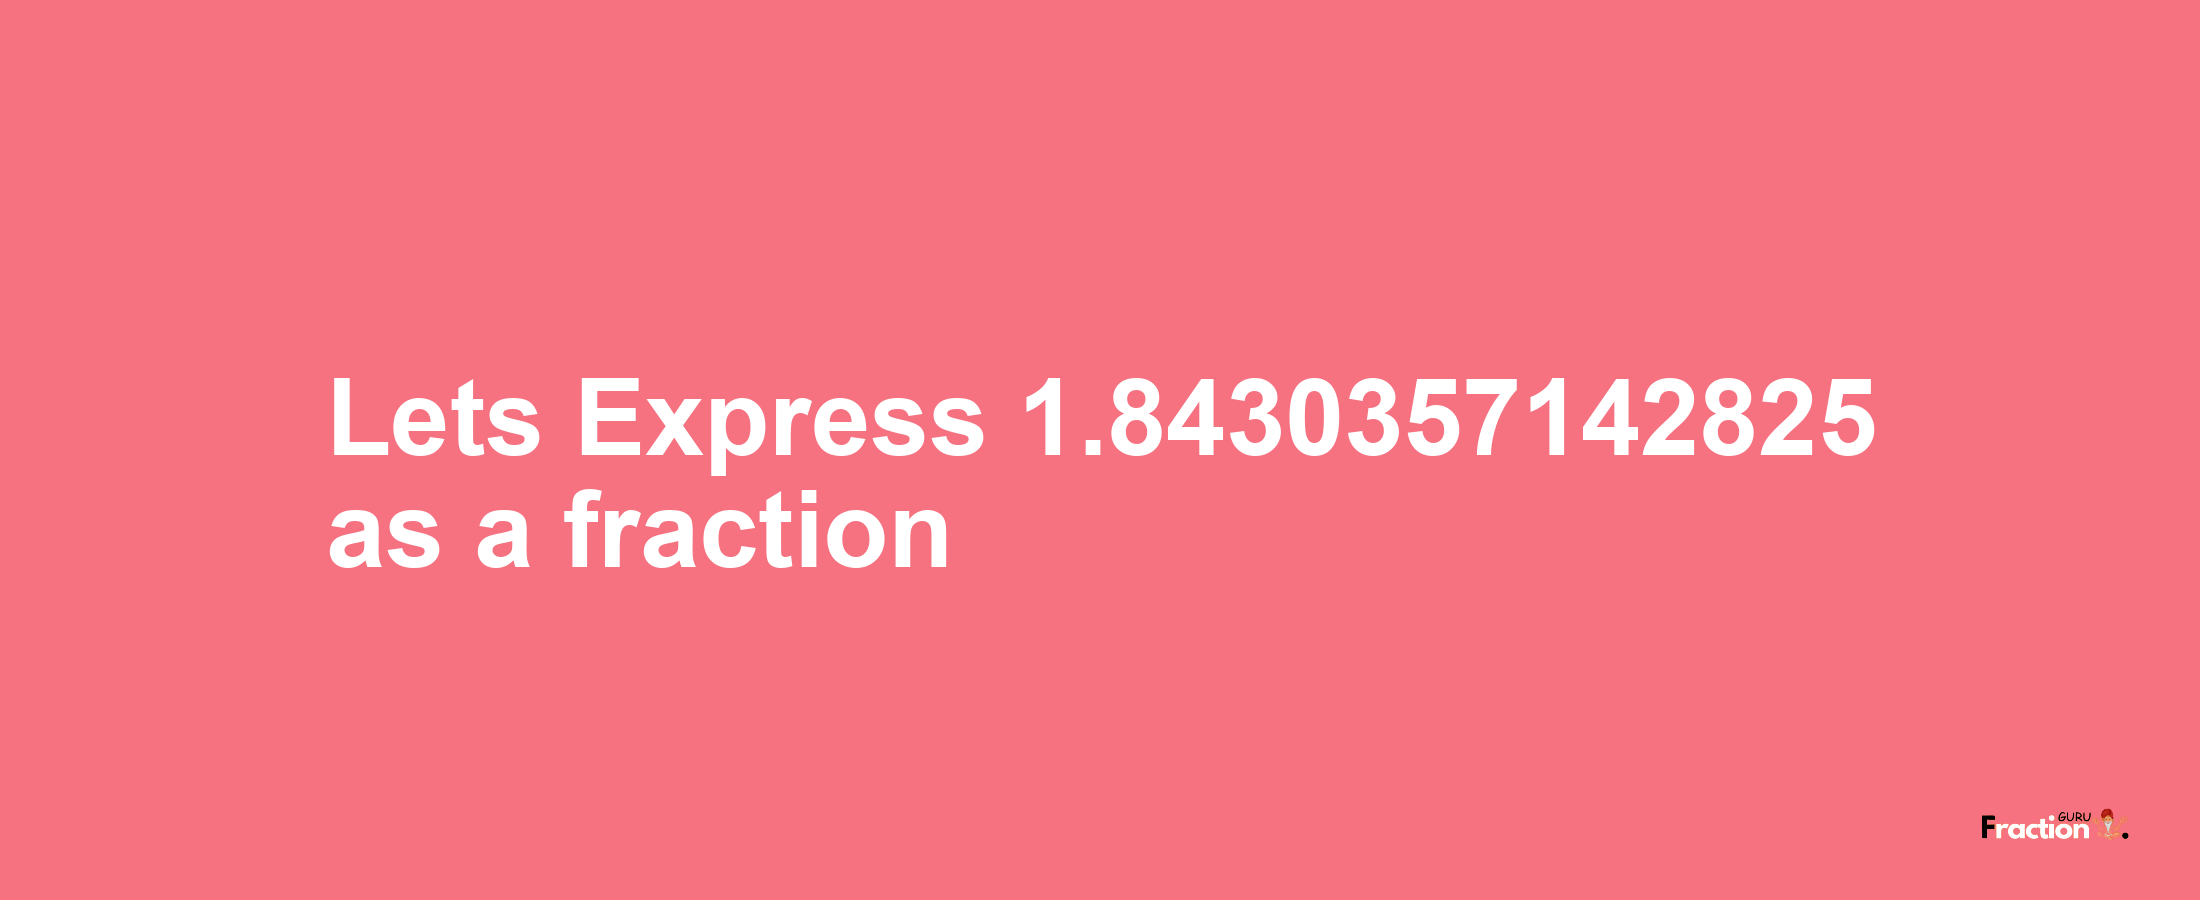 Lets Express 1.8430357142825 as afraction